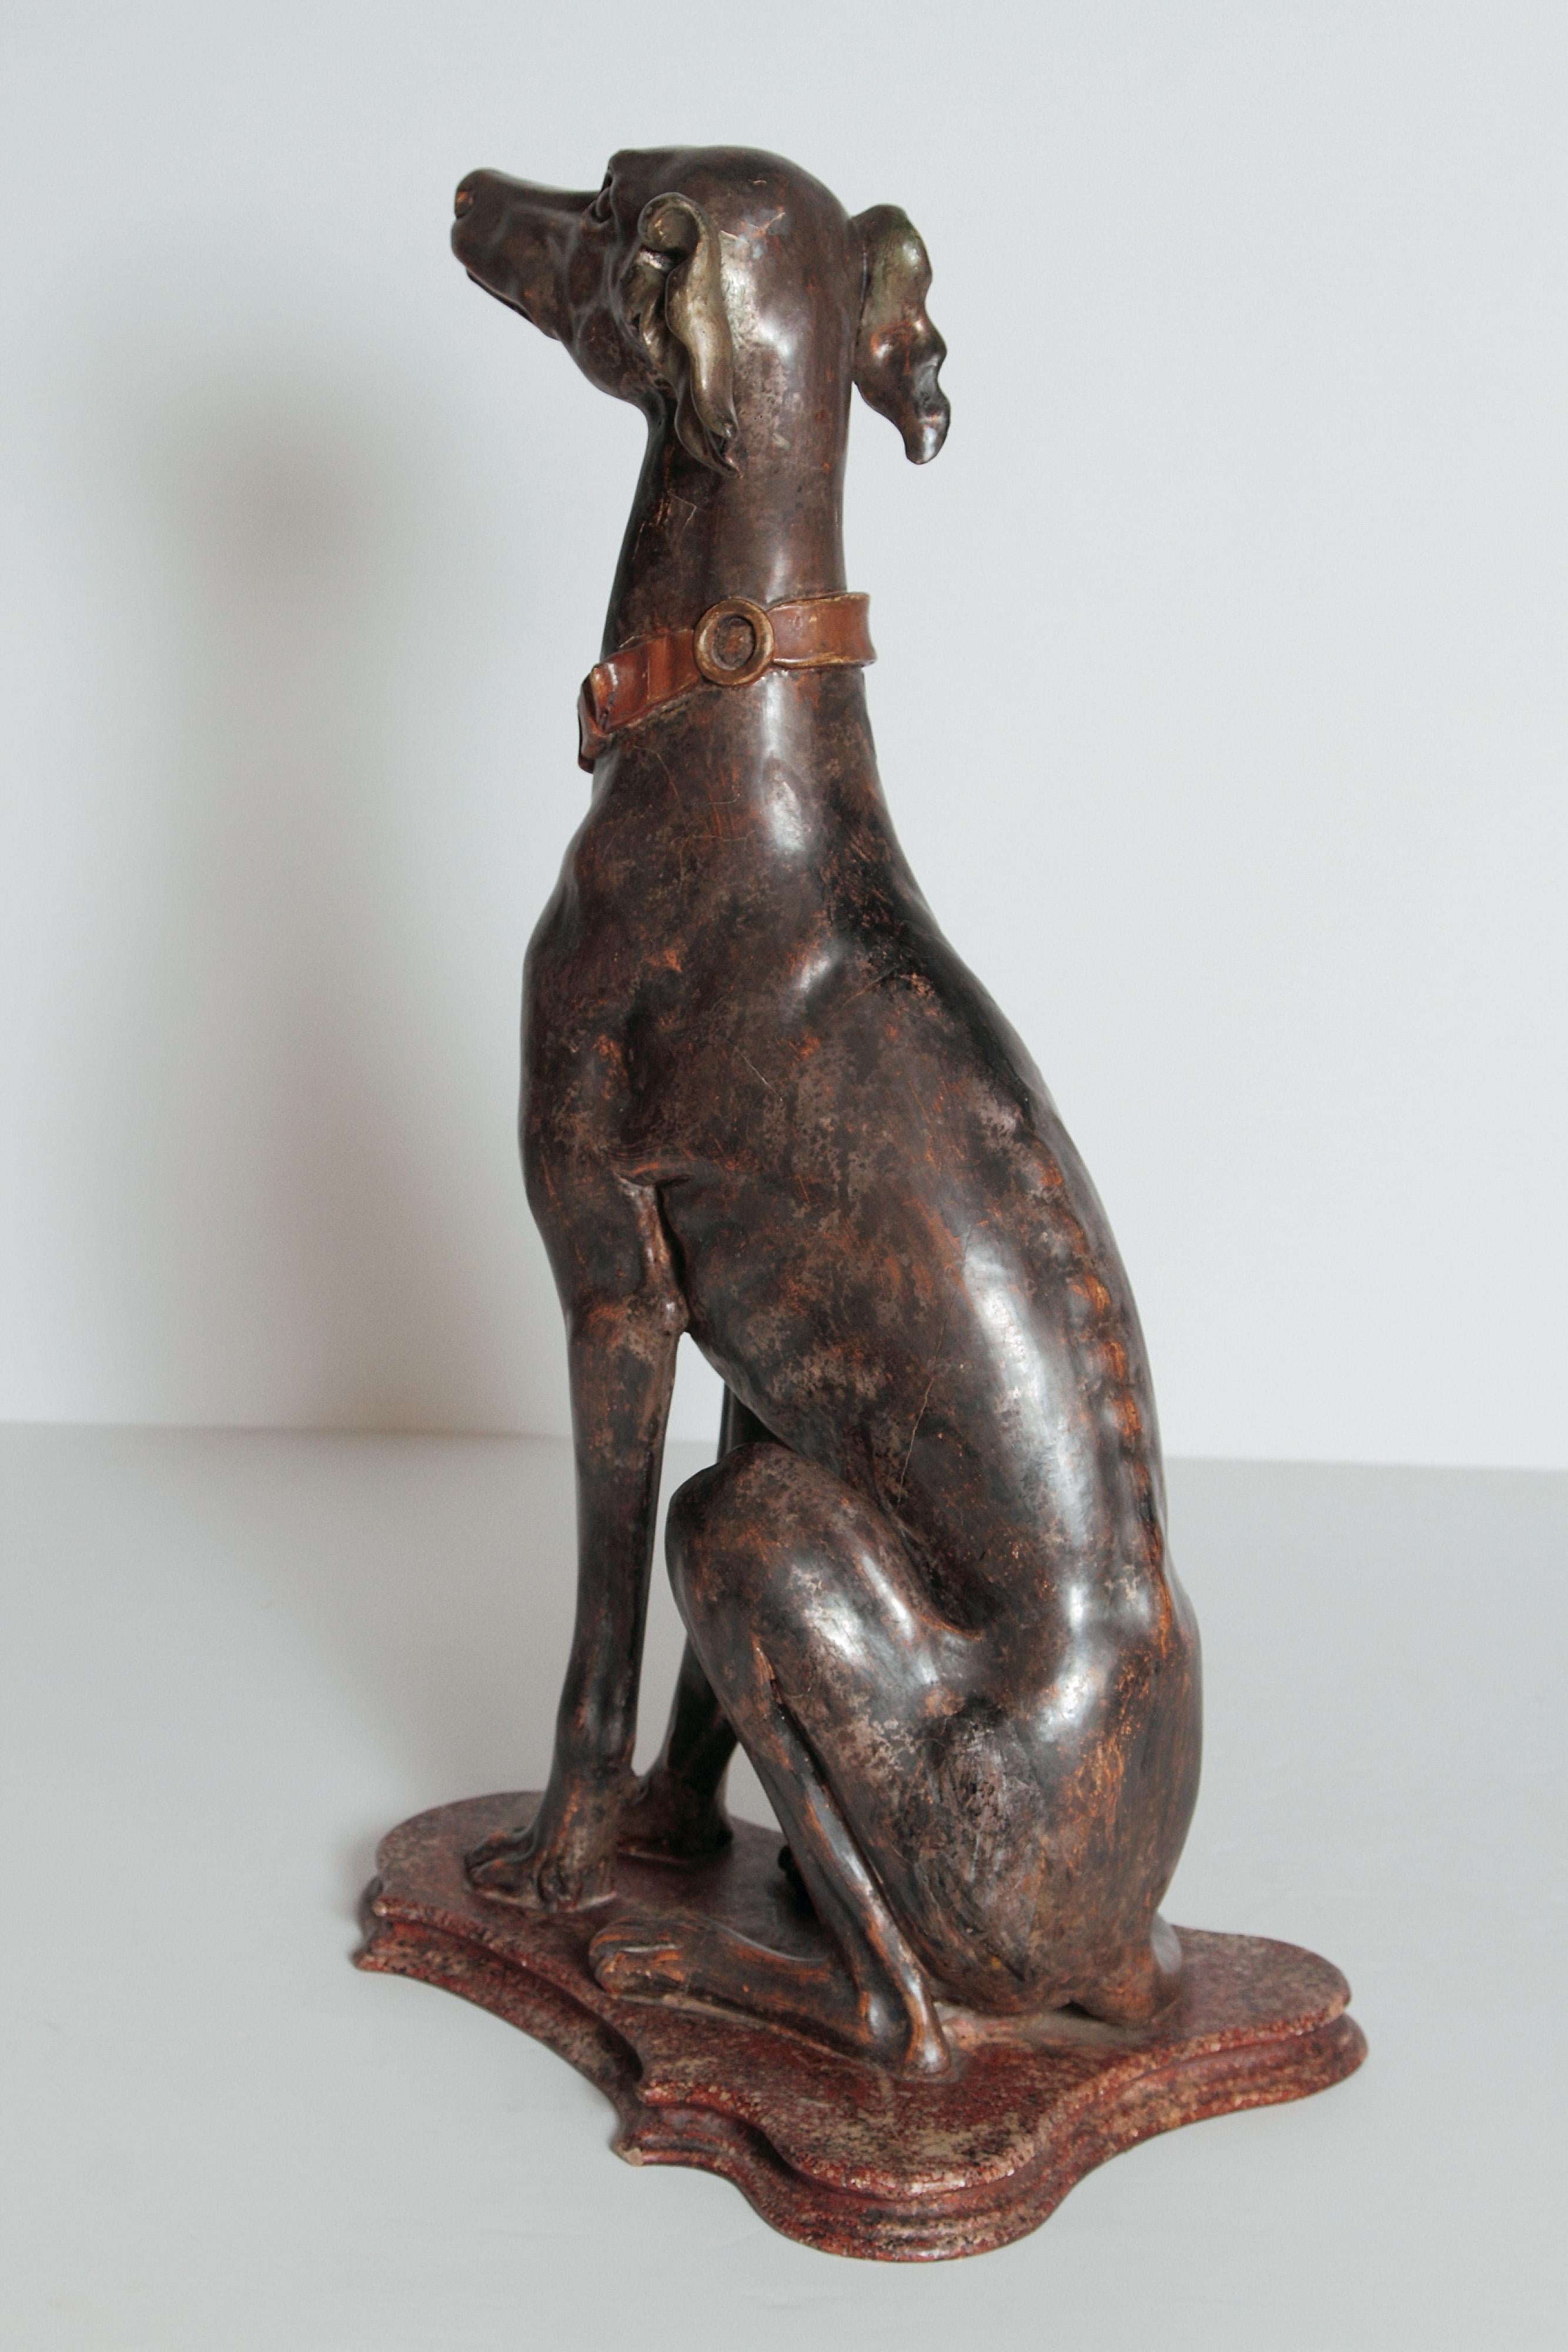 Romantic 19th Century Italian Carved Wood Seated Greyhound Sculpture